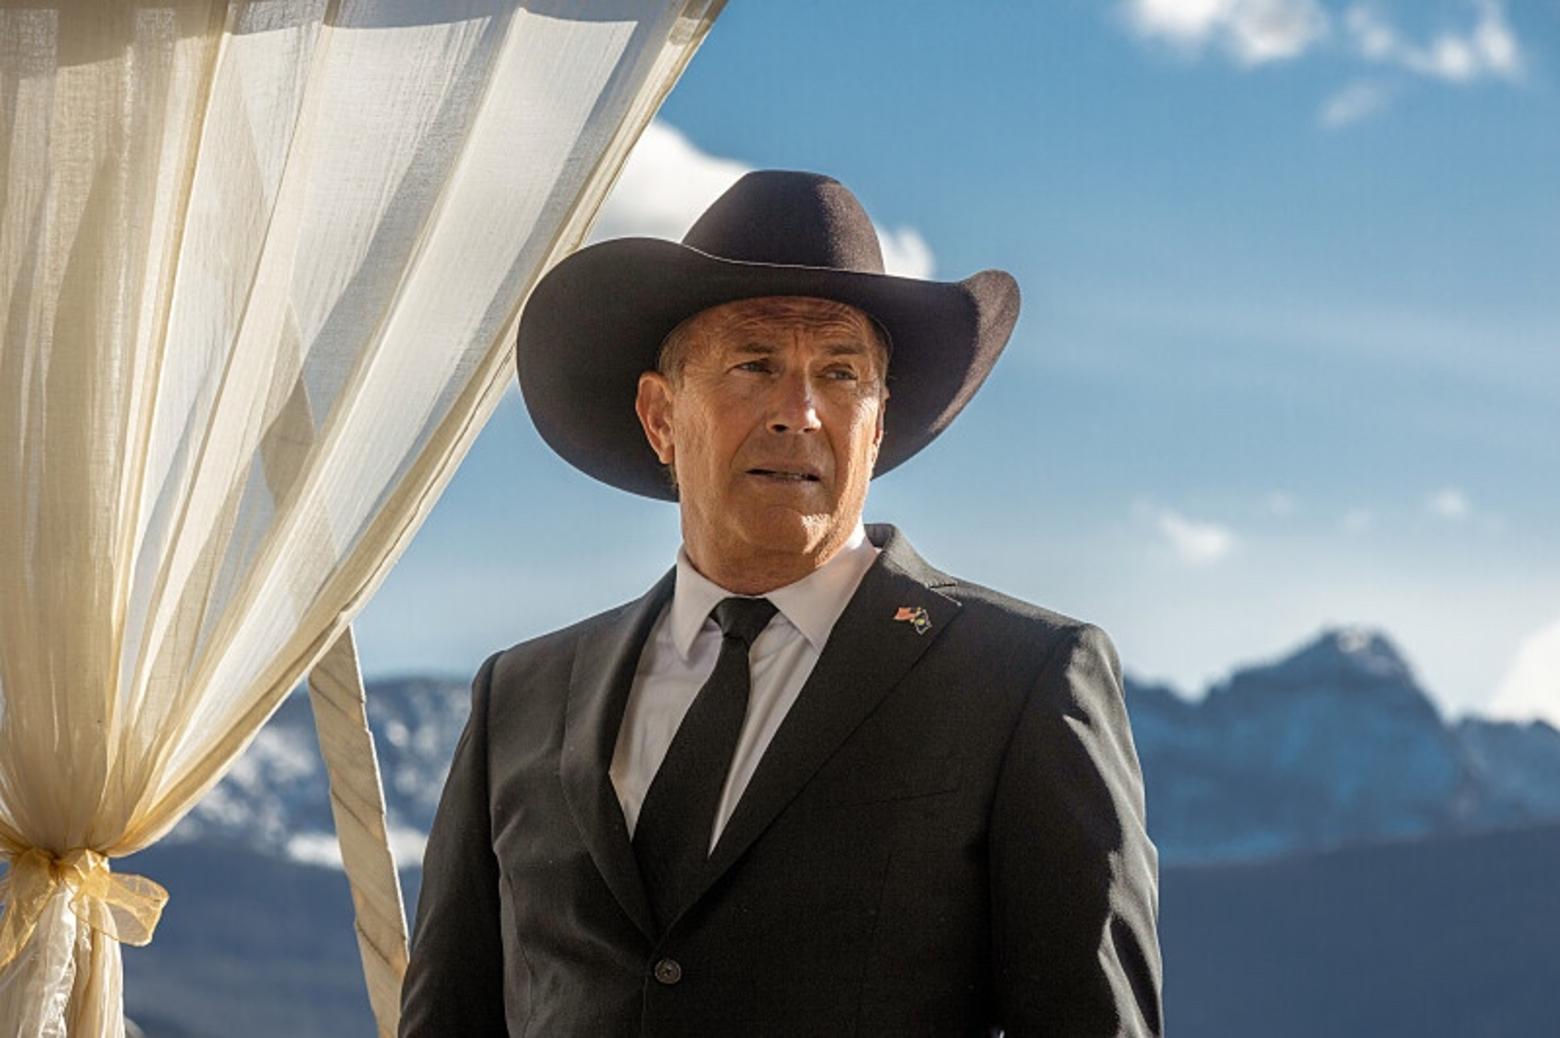 Fictional ranch patriarch-turned-Montana Governor John Dutton III, played by actor Kevin Costner in 'Yellowstone,' has delivered some memorable soliloquies.  Among the most poignant have been his declaration to push back against out of state developers who treat locals as bumpkins and assert that every person will sacrifice their values and integrity for the right price. Is Dutton a hero or villain? Perhaps the answer resides in personal interpretation and compared to what?  Photo courtesy Paramount Network publicity